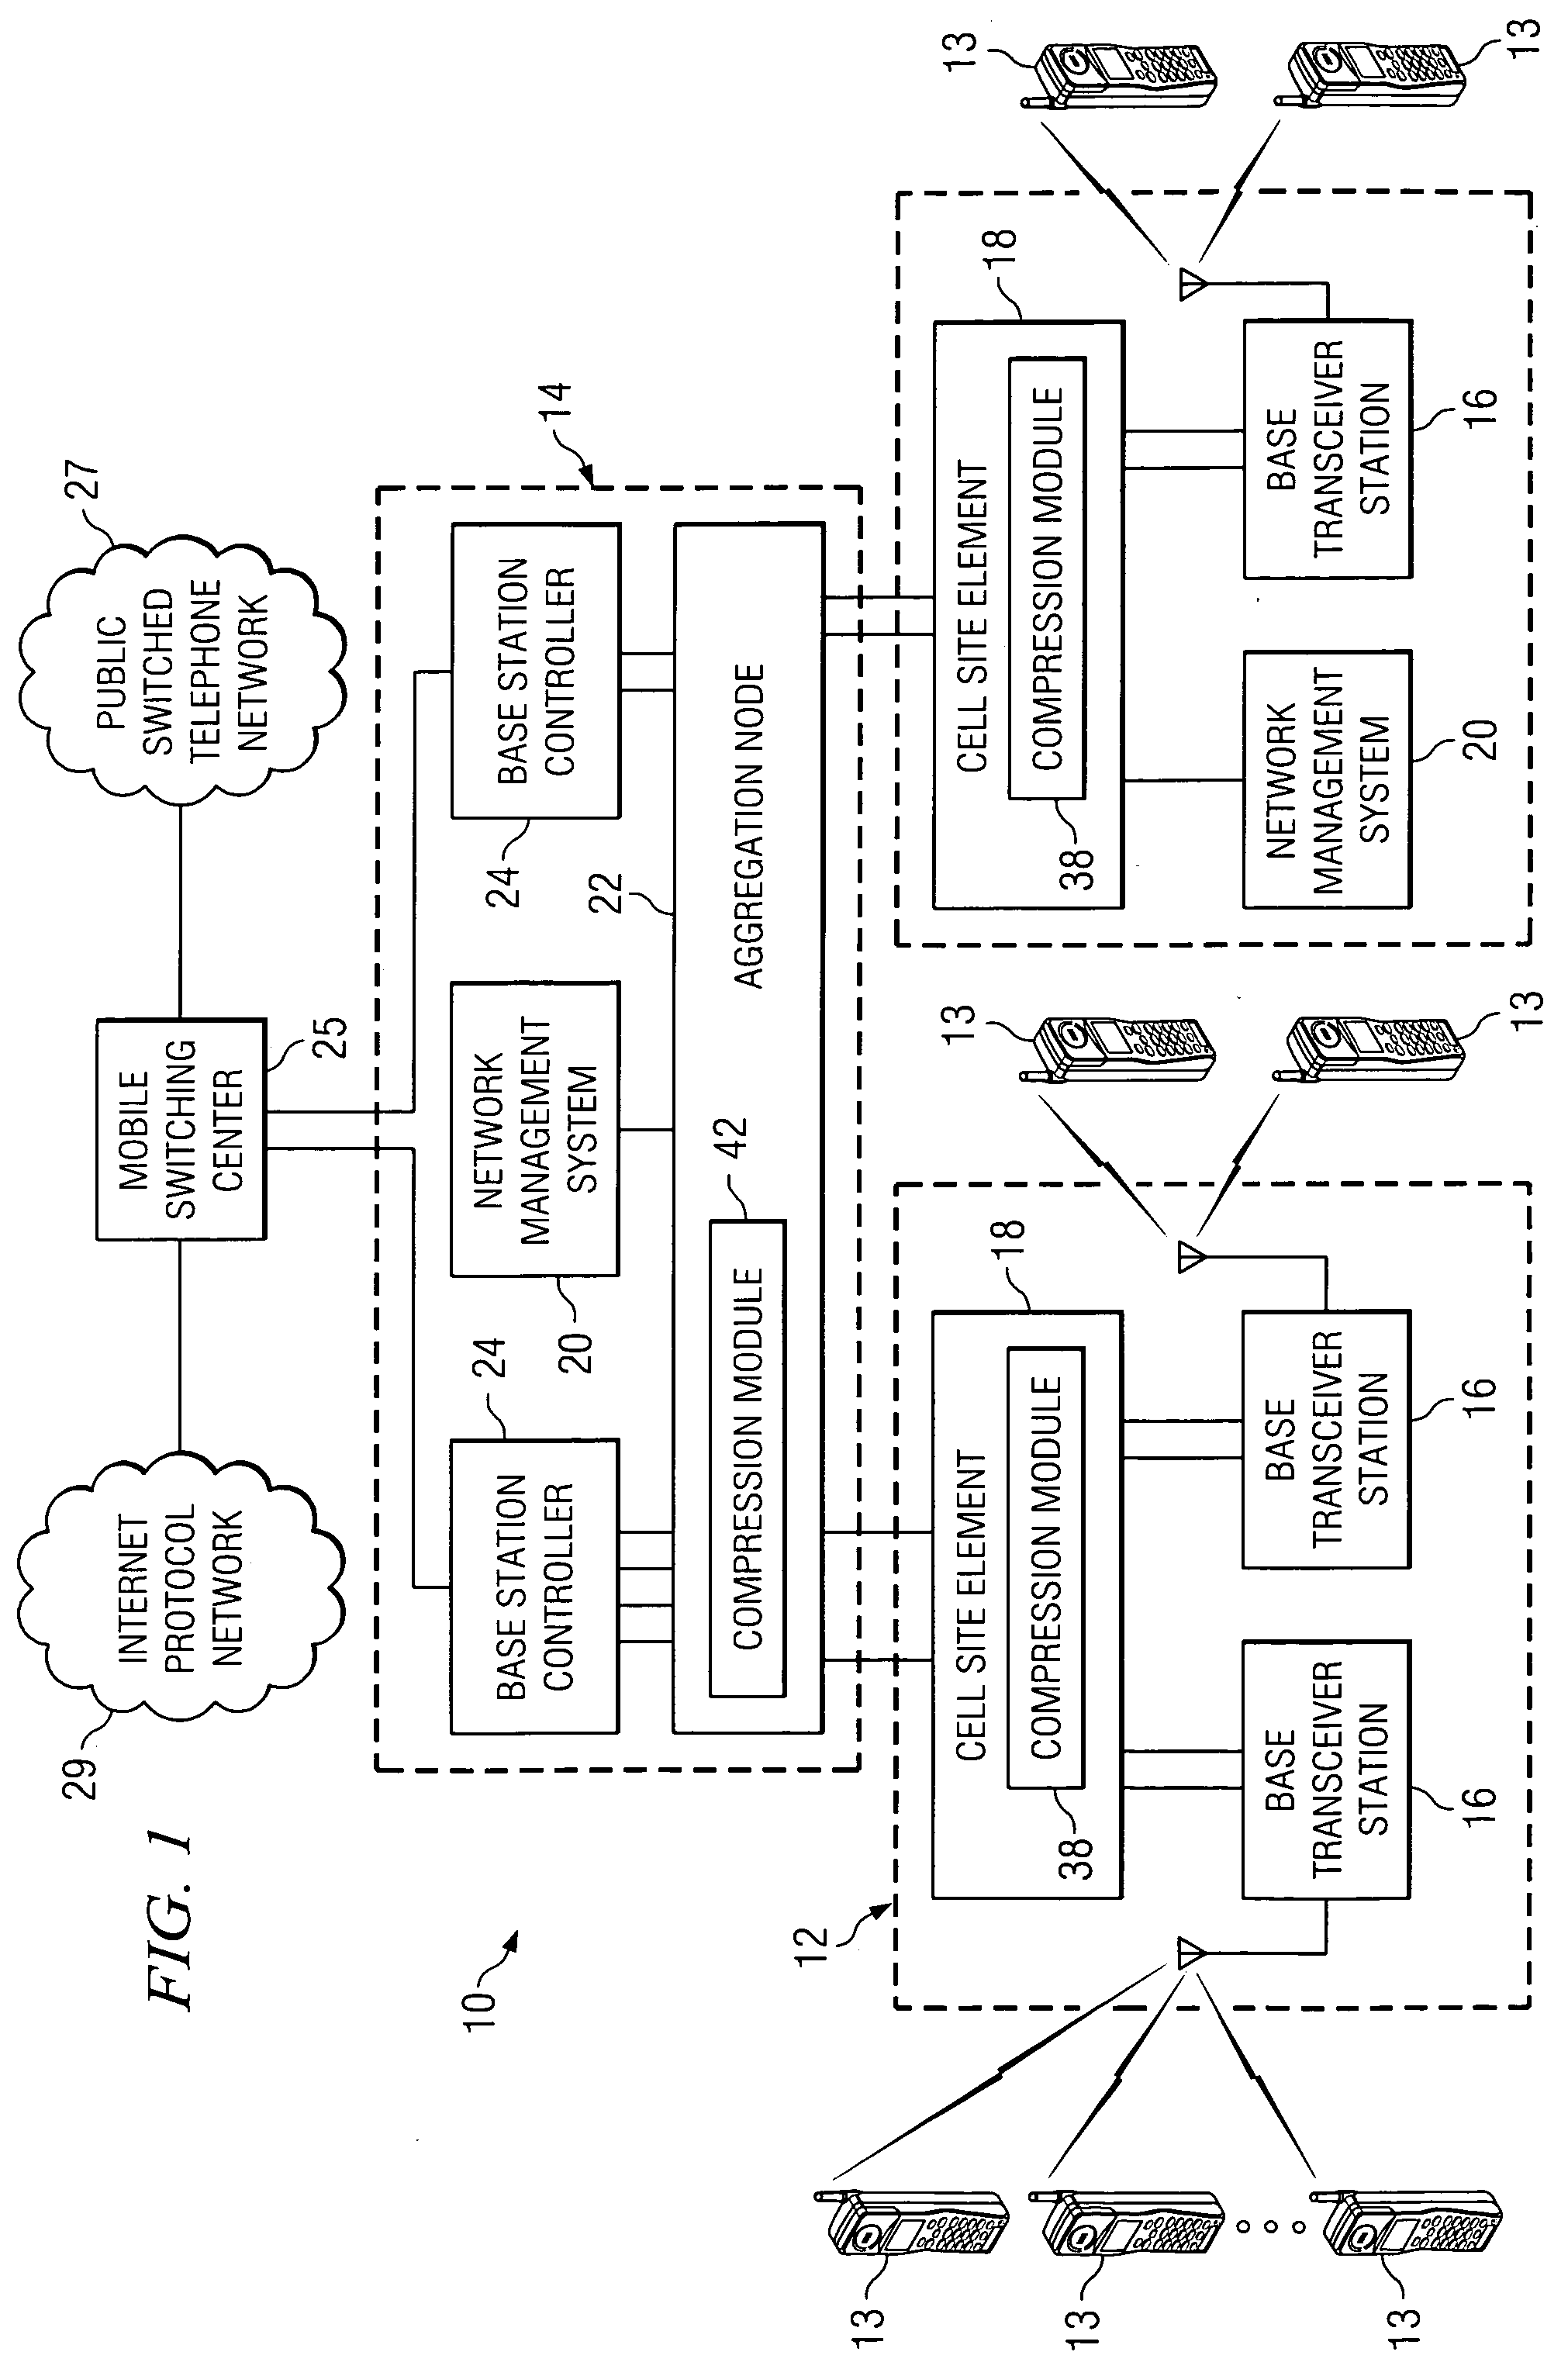 System and method for synchronizing a back-up device in a communications environment